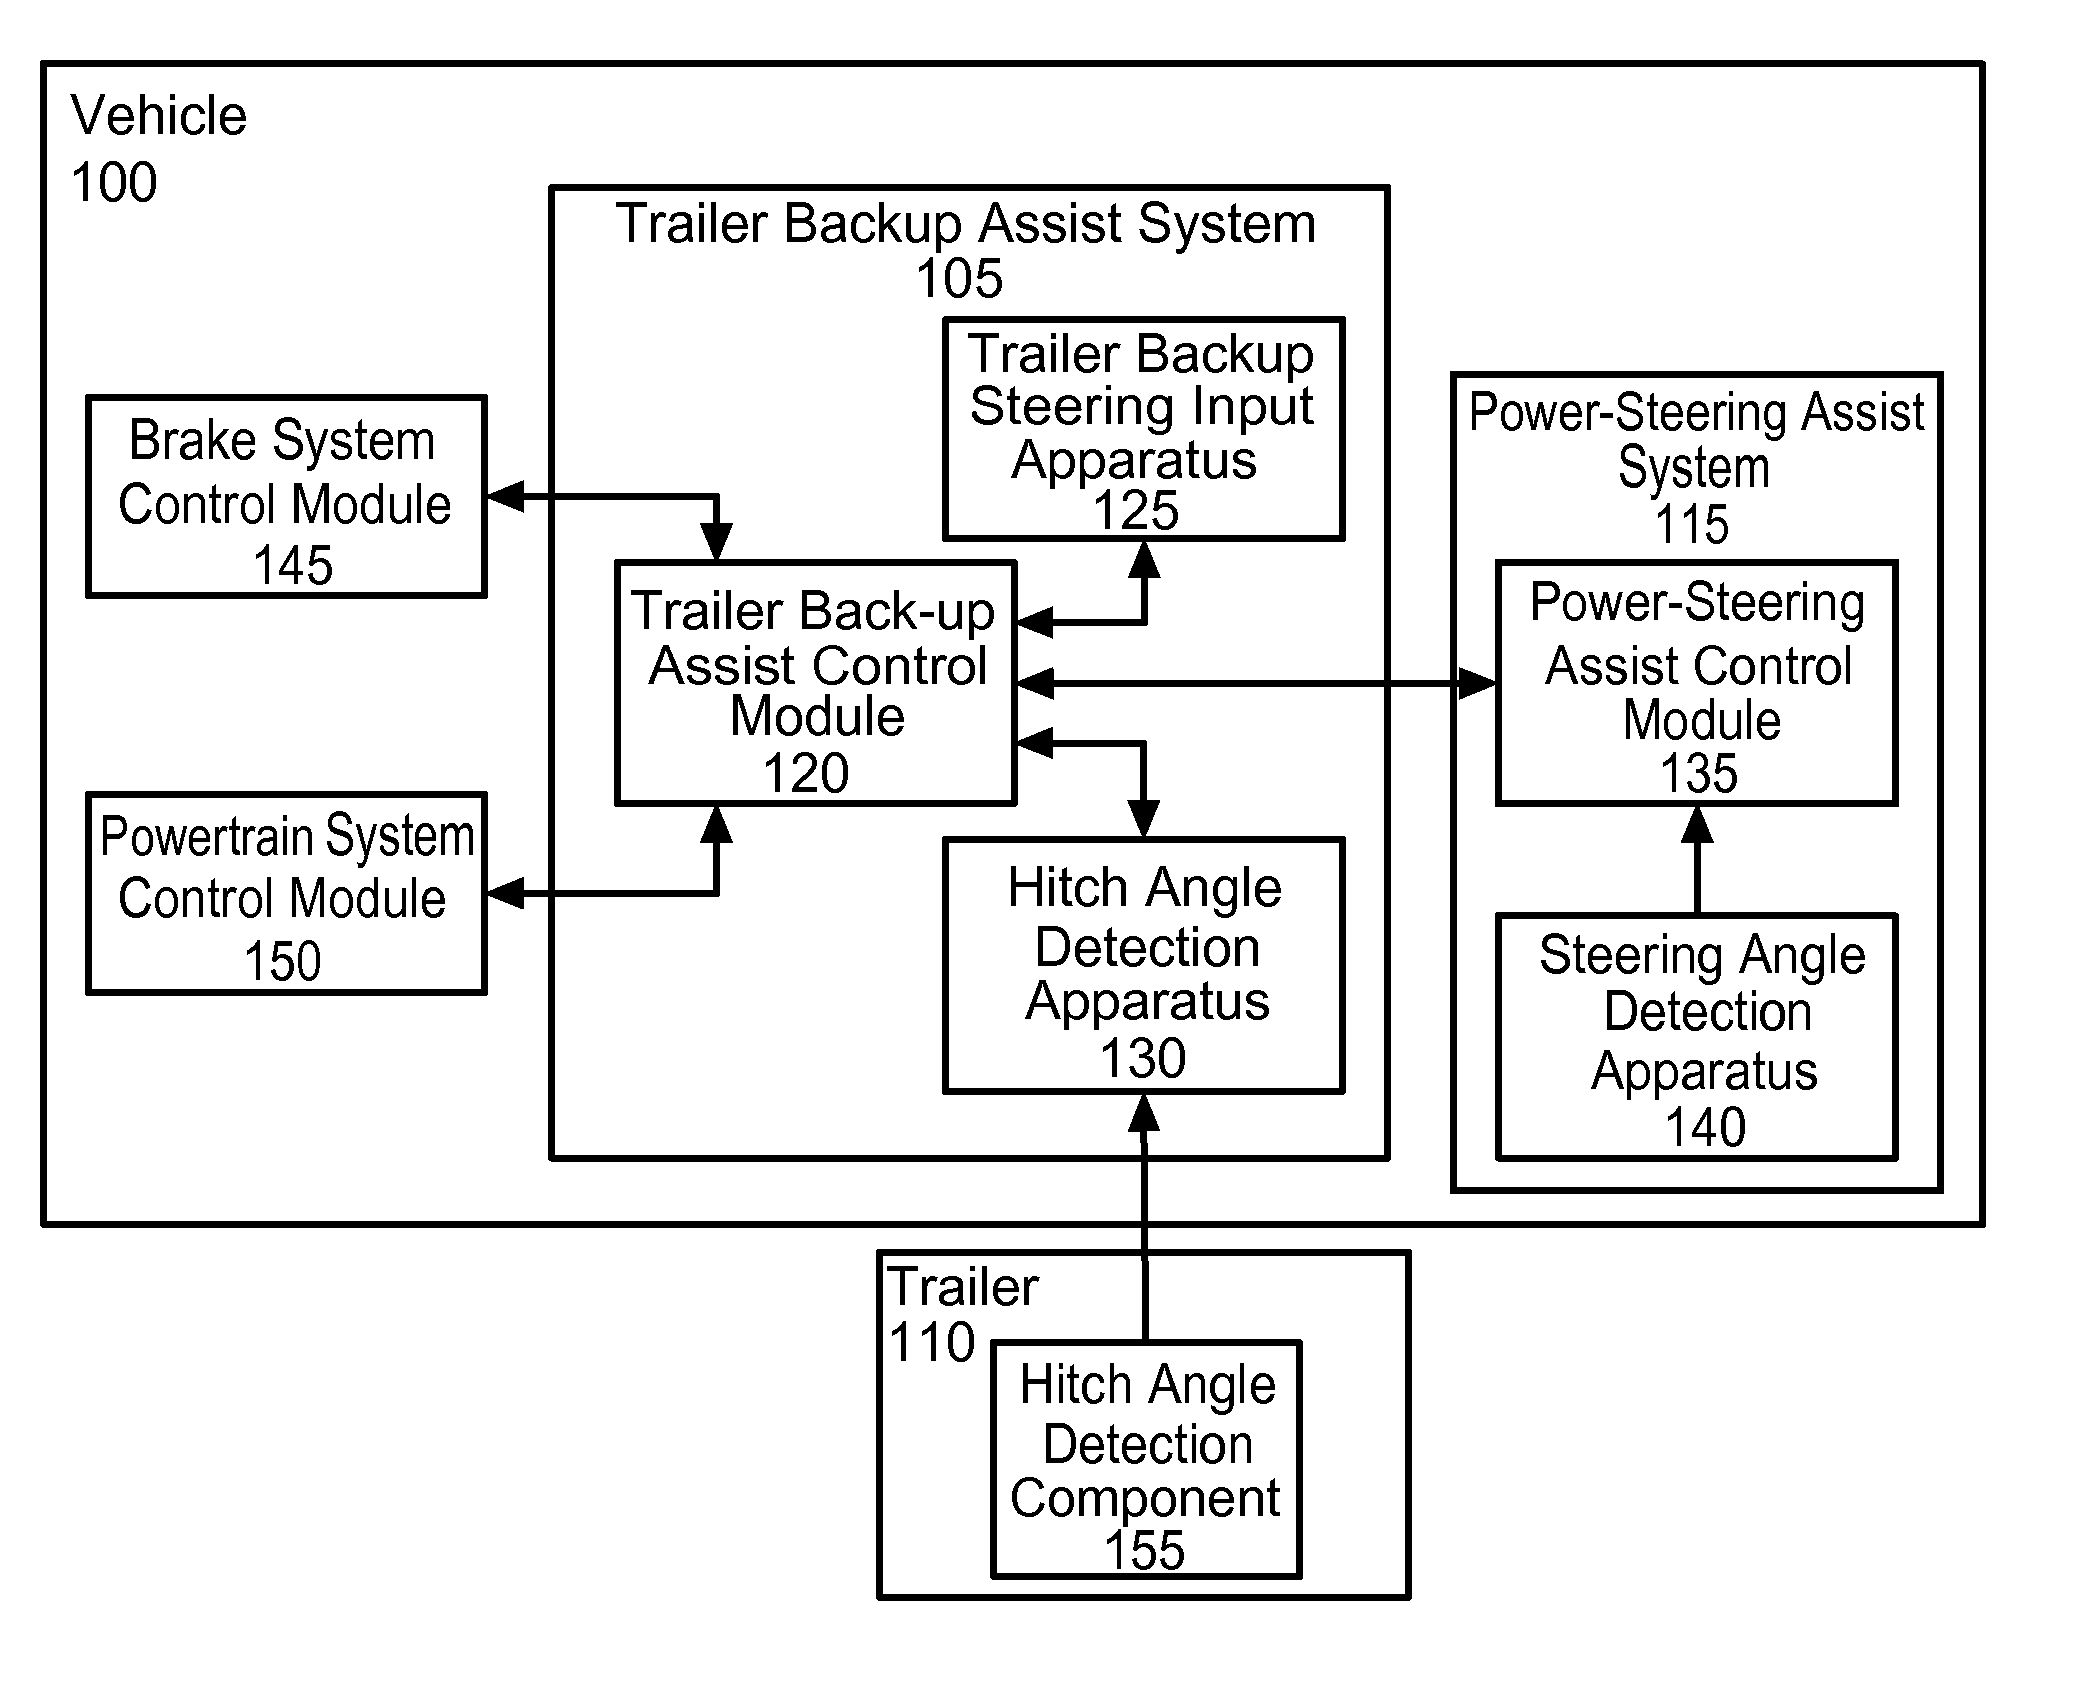 Display system utilizing vehicle and trailer dynamics